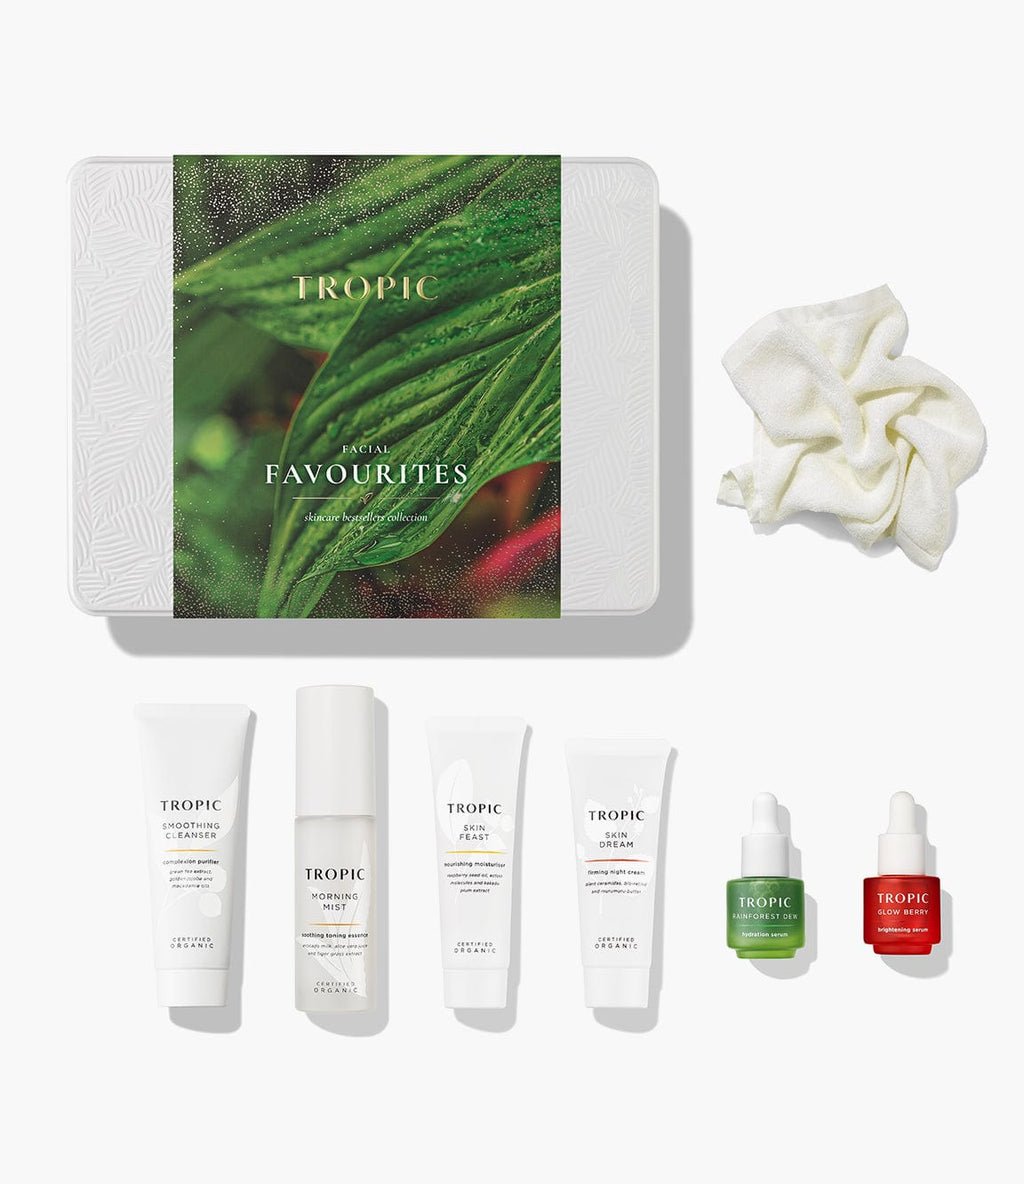 FACIAL FAVOURITES skincare bestsellers collection FROP 1 TROPIC TROPIC TROPIC TROPIC voRNING 